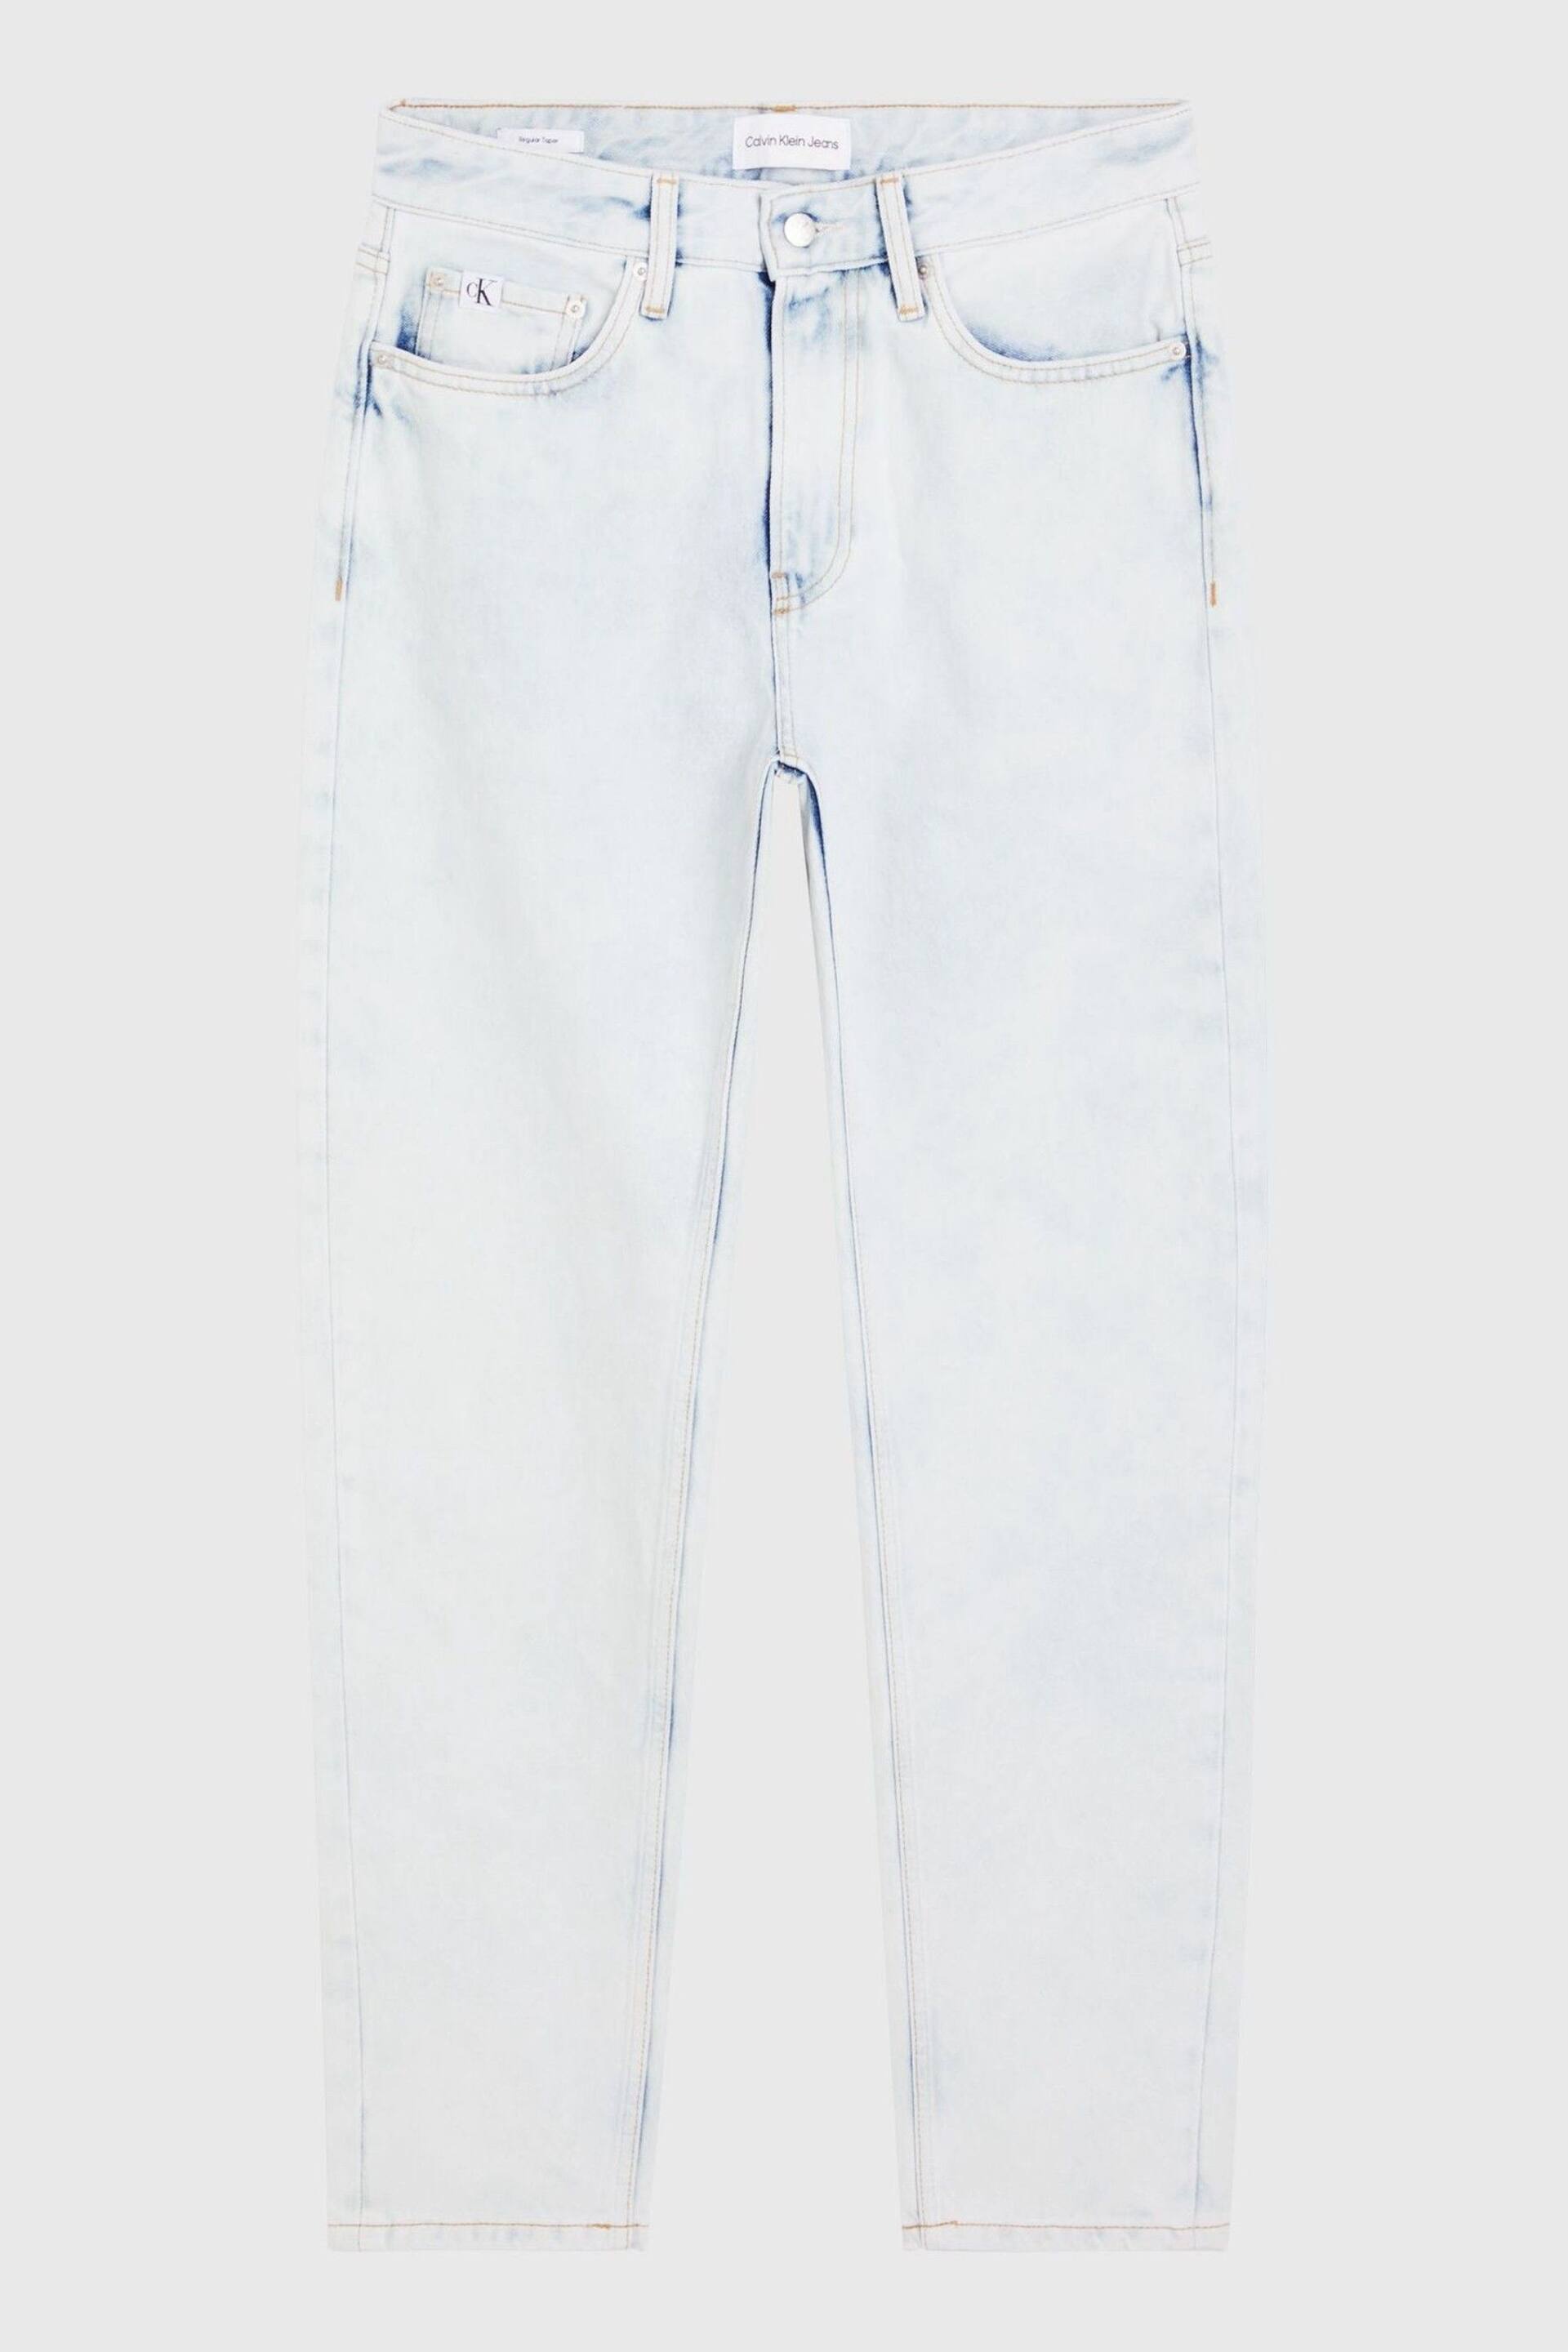 Calvin Klein Jeans Blue Jeans - Image 5 of 5